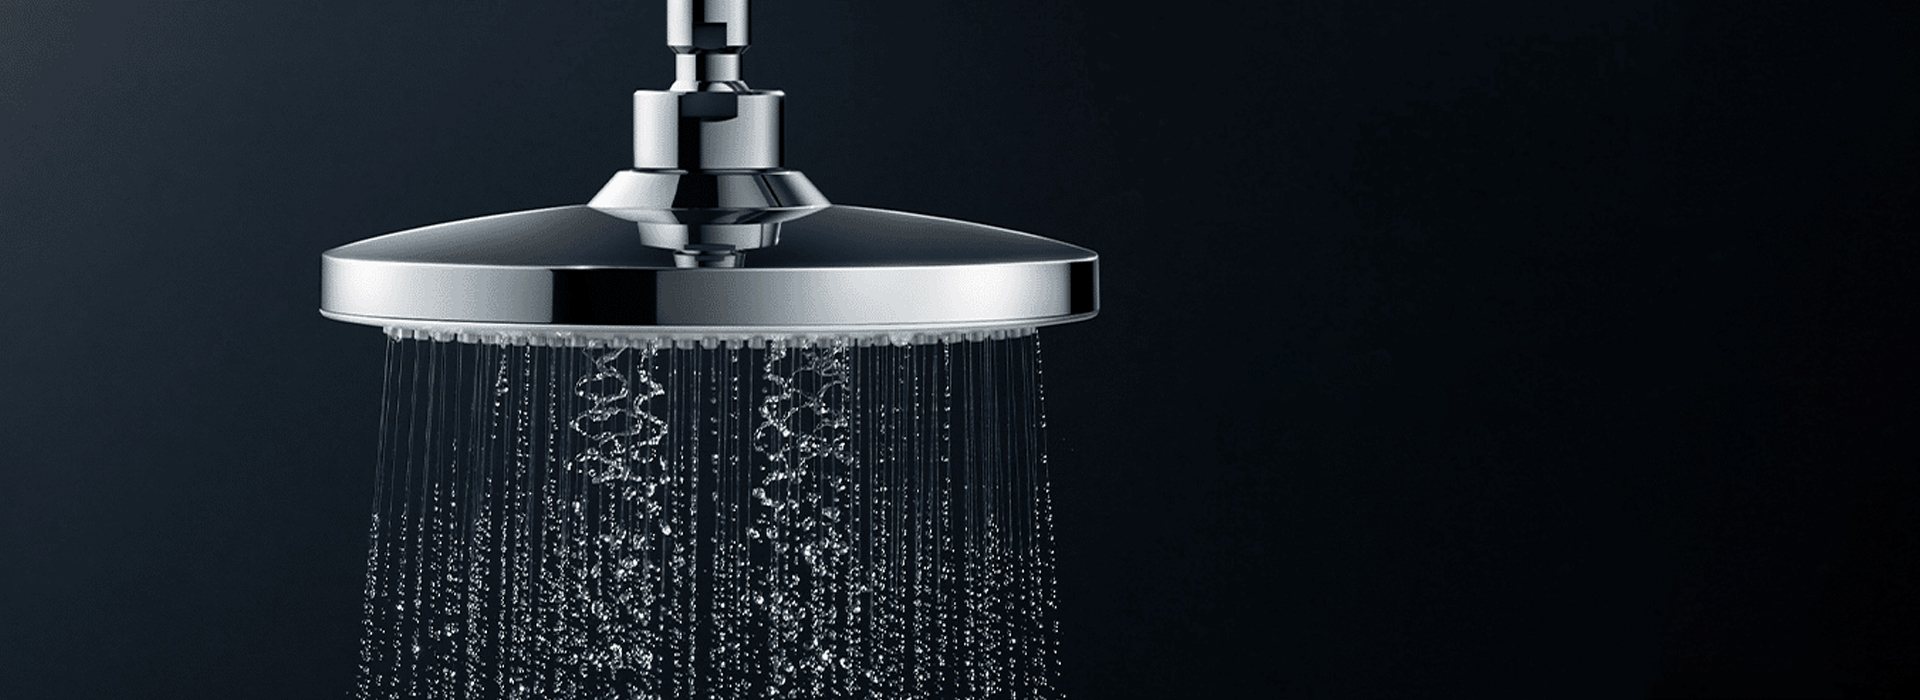 Useful Tips for Selecting the Ideal Rain Shower Head